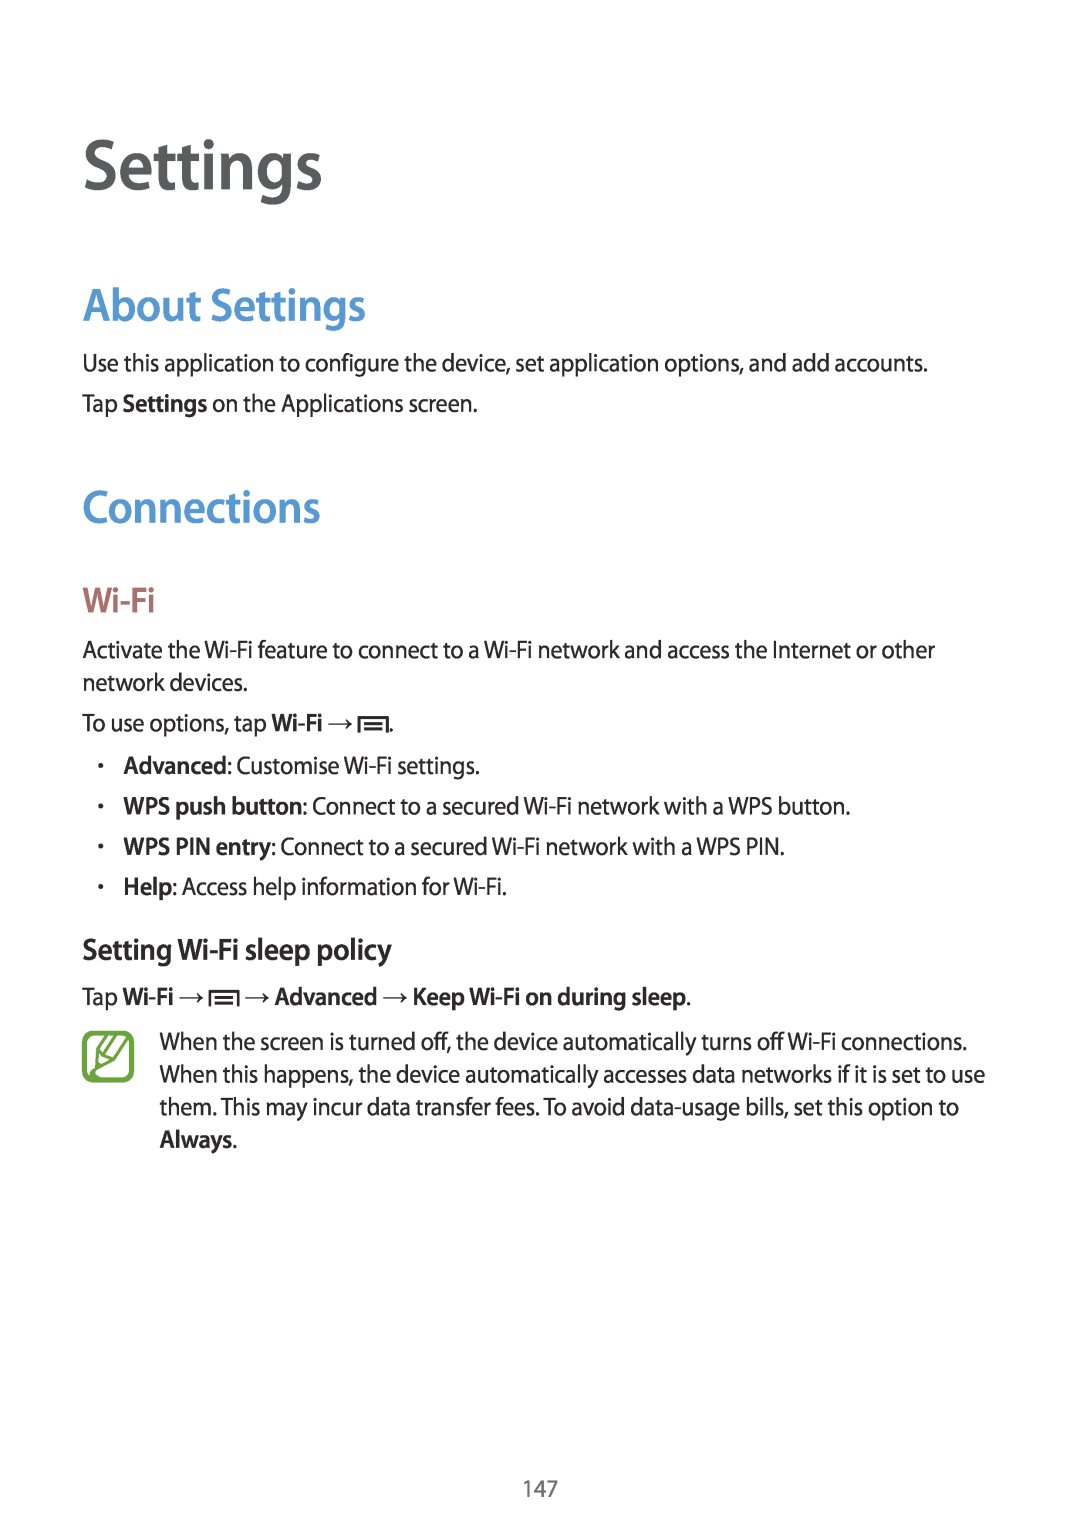 Samsung SM-N9005ZWEAFR, SM-N9005ZKEEGY, SM-N9005ZIEEGY manual About Settings, Connections, Setting Wi-Fi sleep policy 